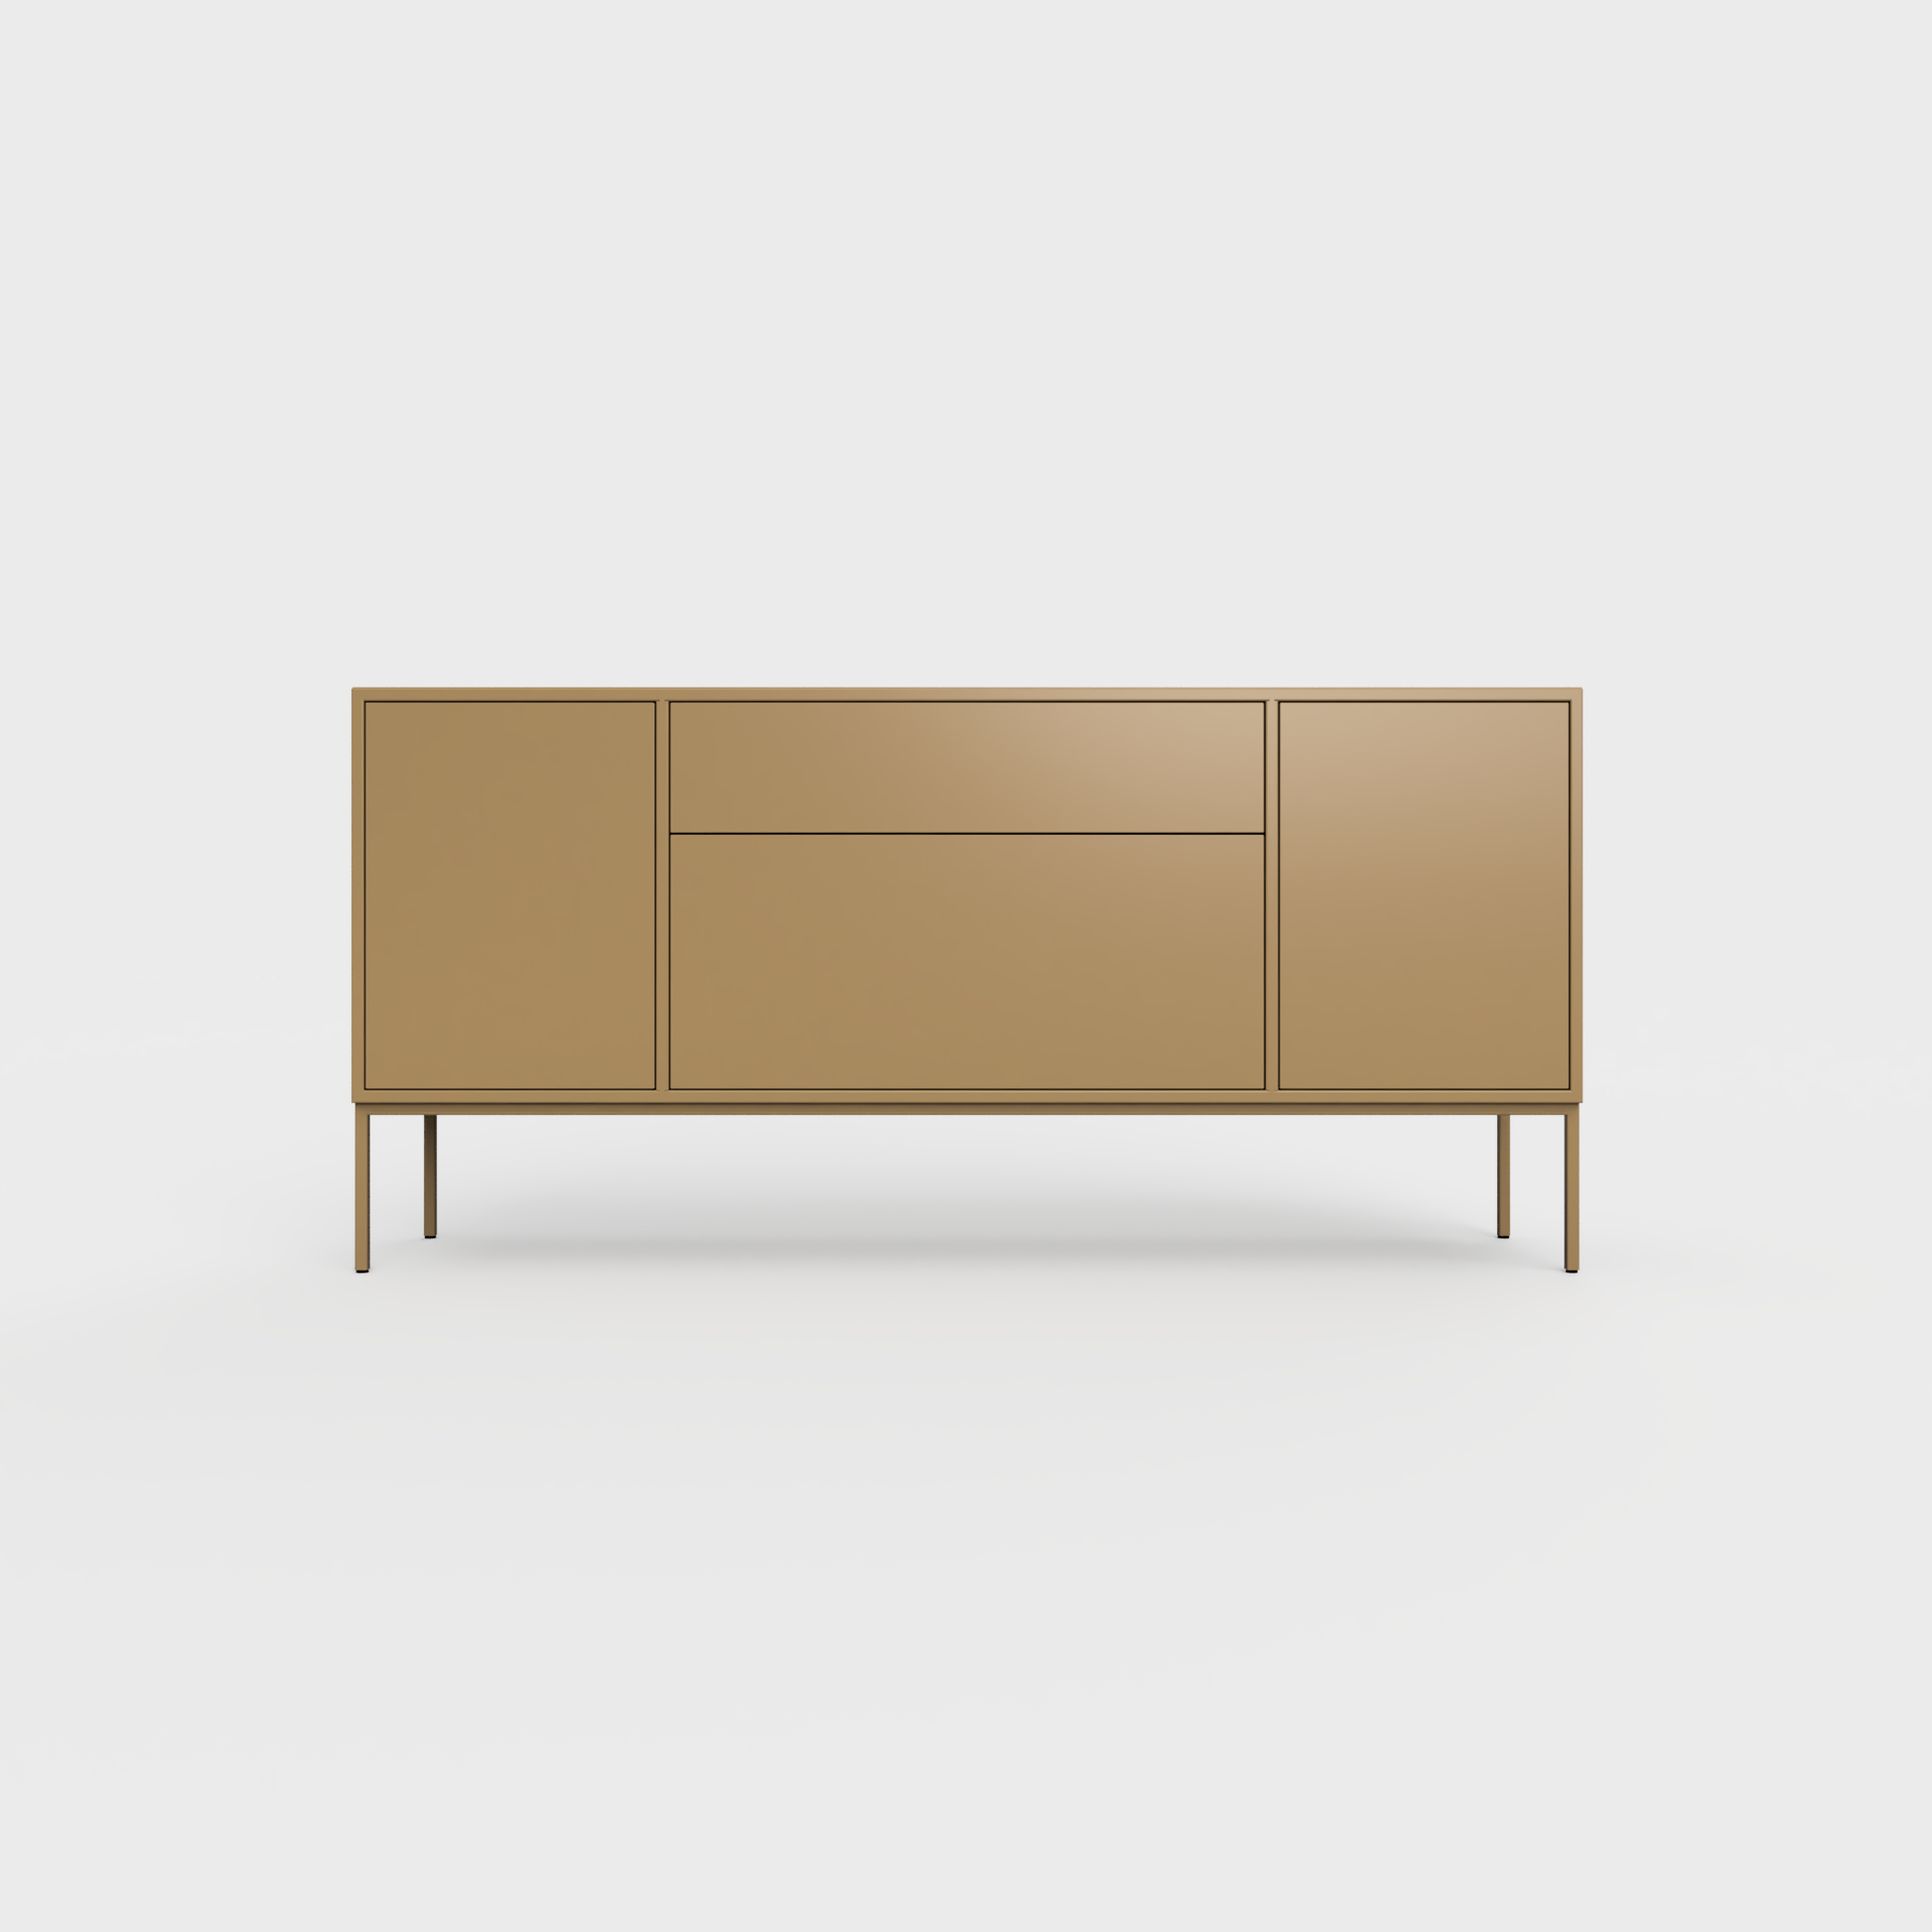 Arnika 02 Sideboard in Desert Palm color, powder-coated steel, elegant and modern piece of furniture for your living room